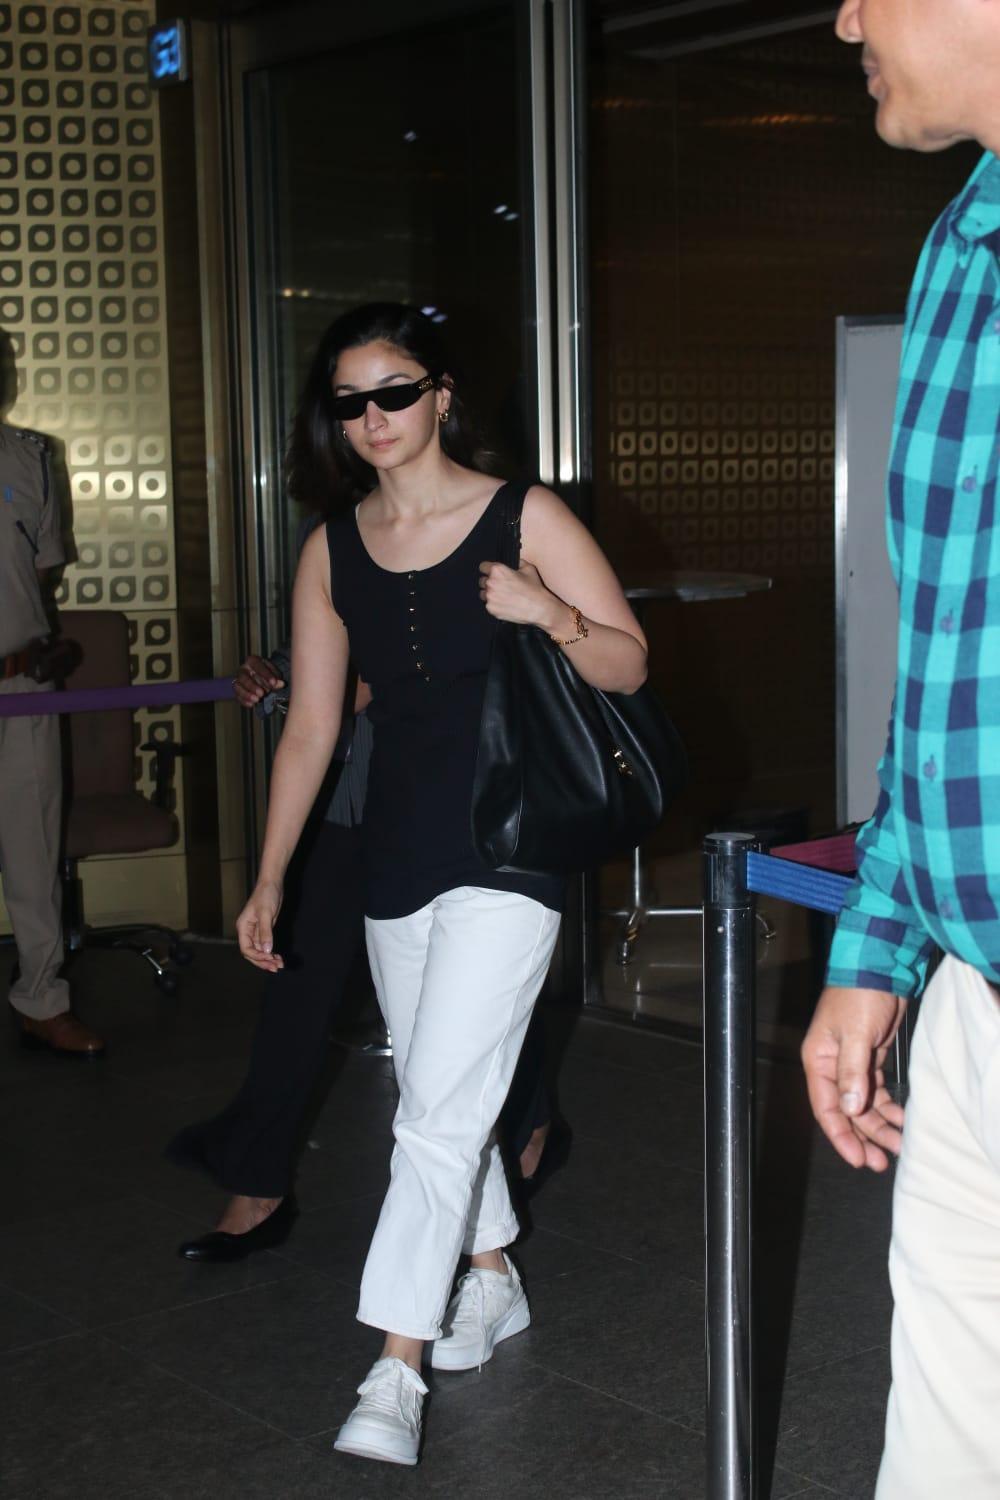 Alia Bhatt was spotted at the airport